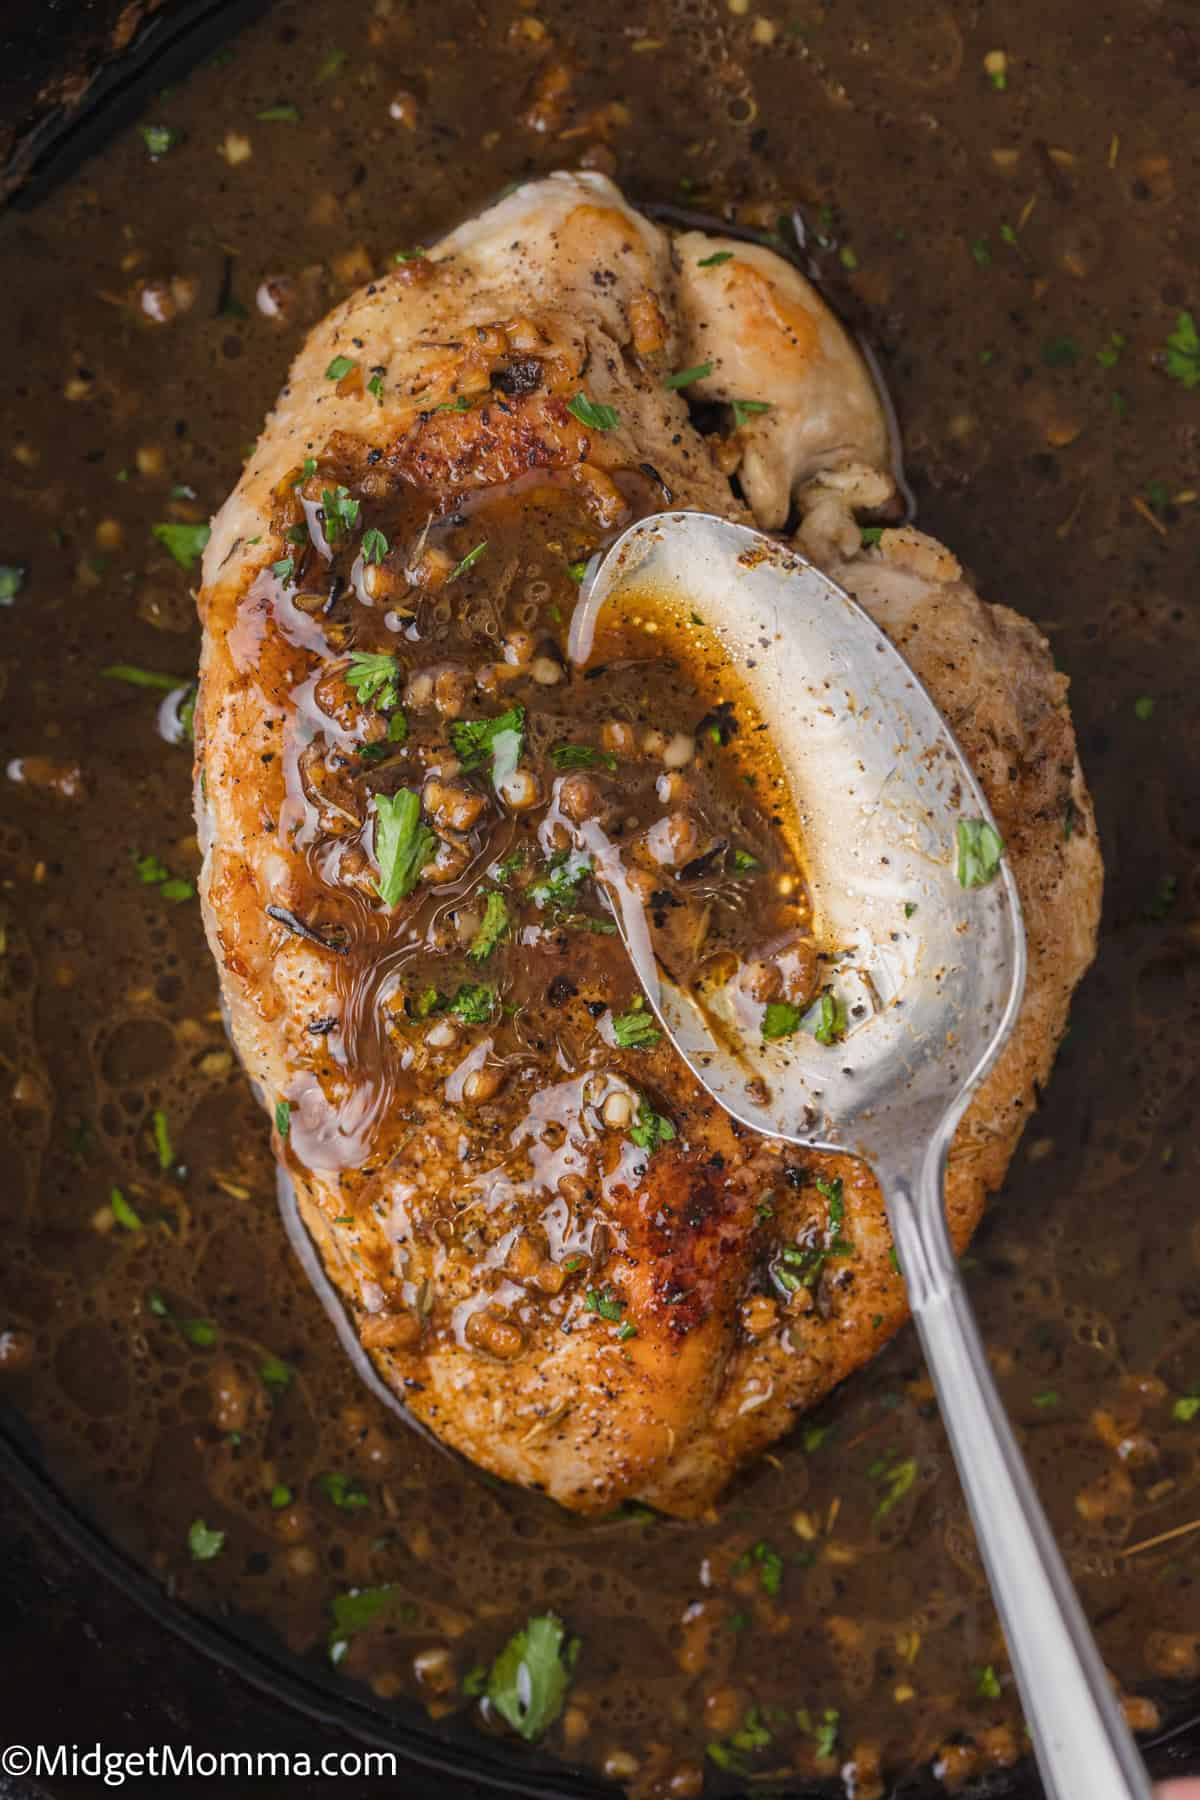 A cooked chicken breast covered in a brown sauce with seasoning and herbs, with a spoon placed on top of it, in a dark pan.